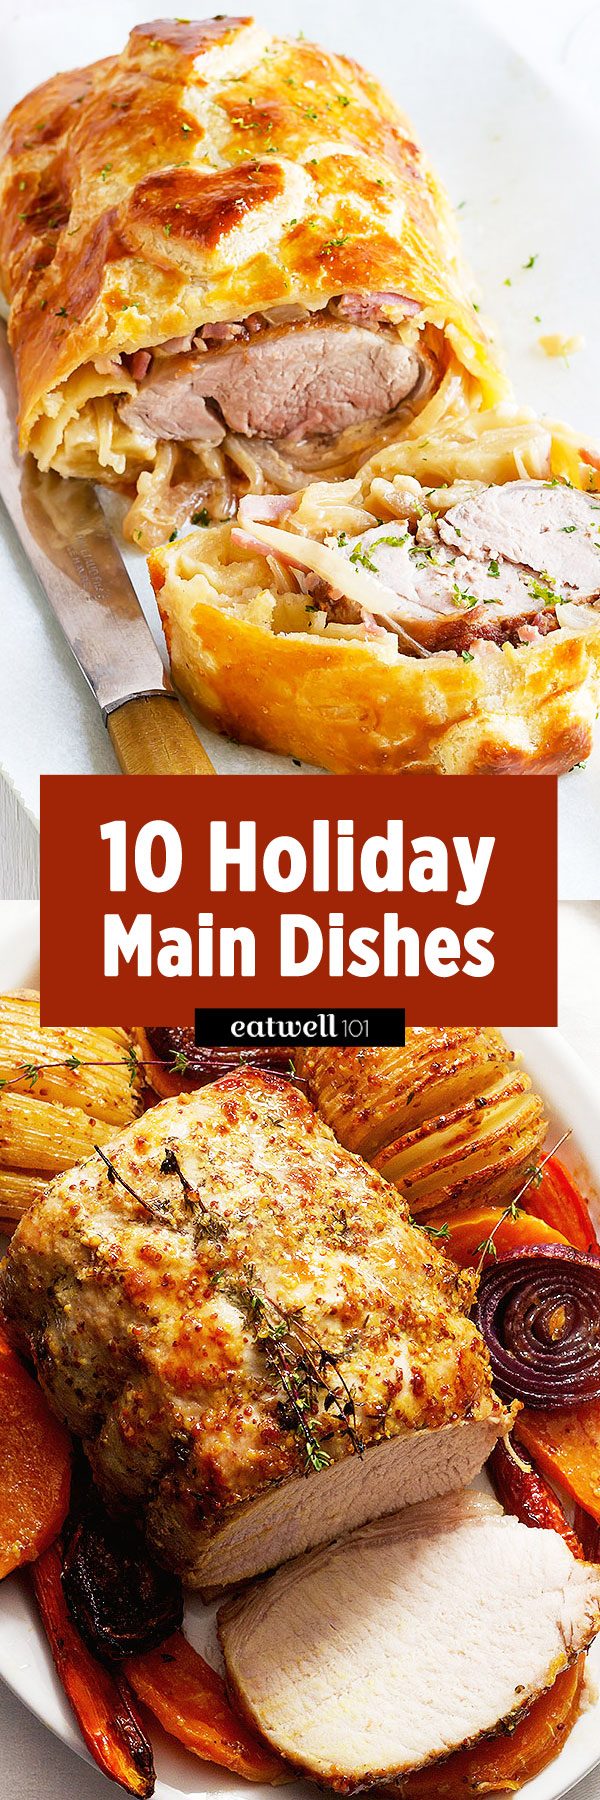 11 Main Dishes to Take Your Holiday Dinner Up a Notch — Eatwell101